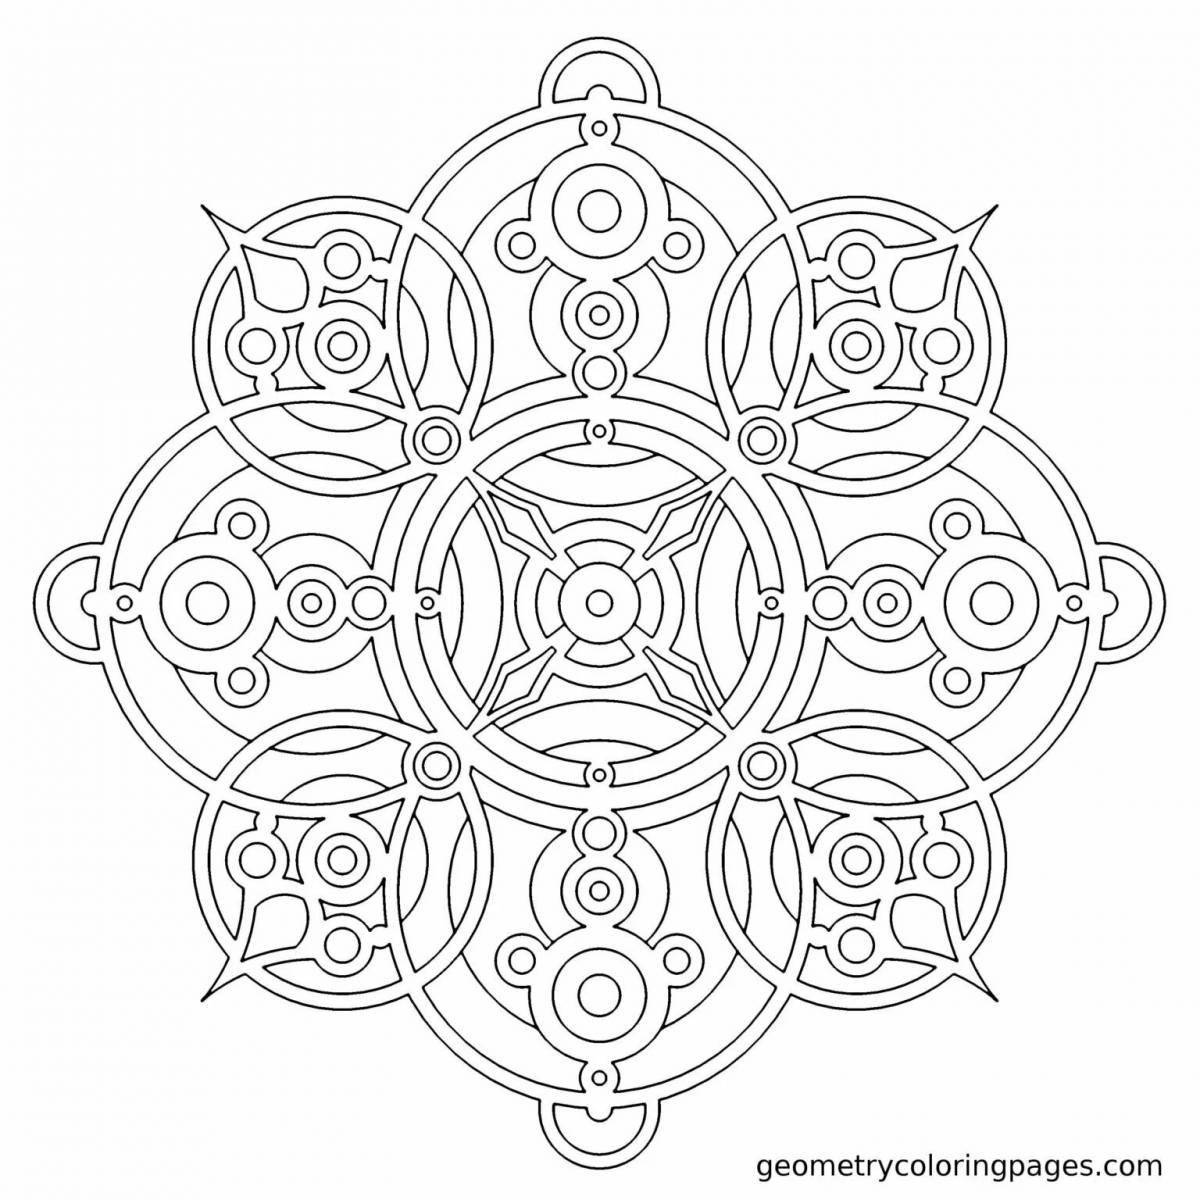 Essential coloring mandala of wealth and prosperity